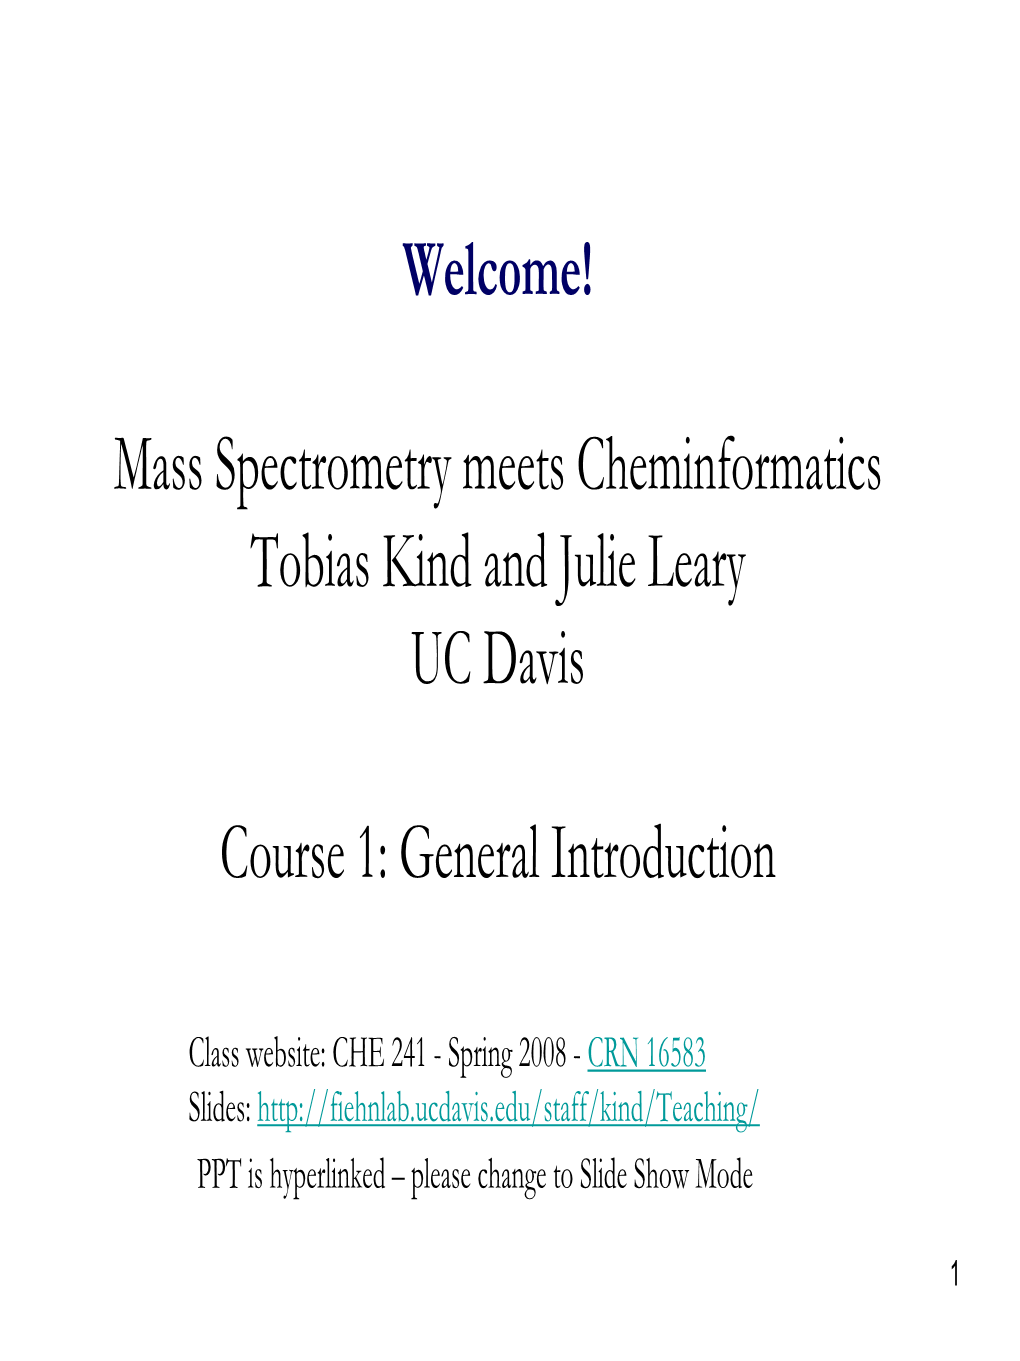 Cheminformatics and Mass Spectrometry Course